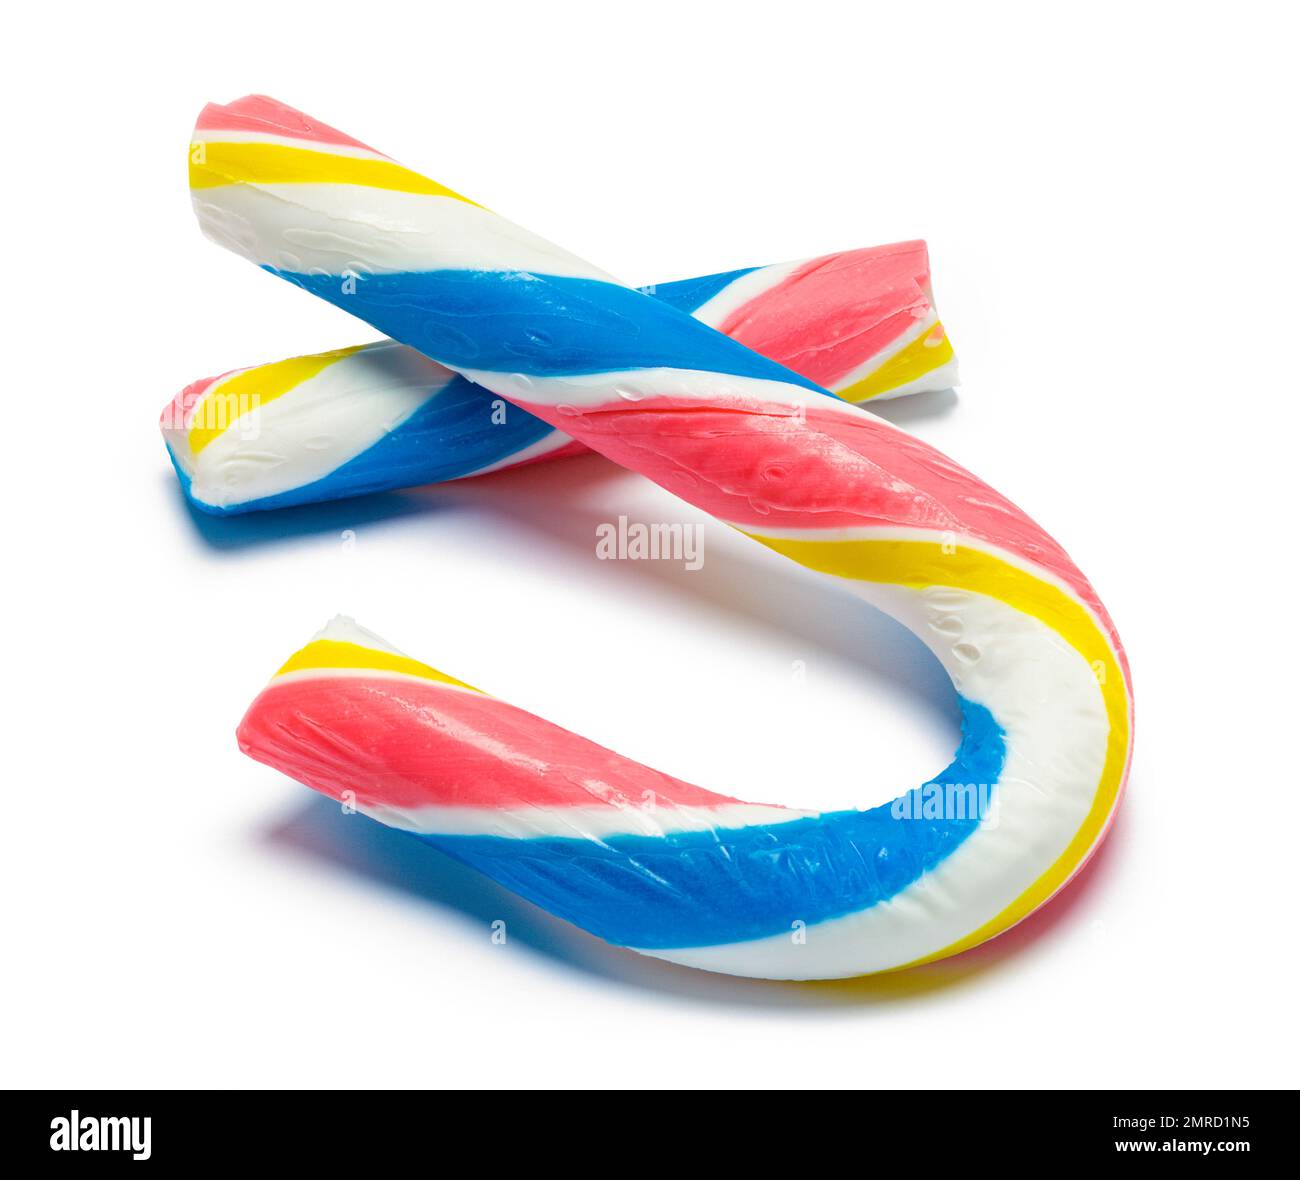 Broken Candy Cane Cut Out on White. Stock Photo